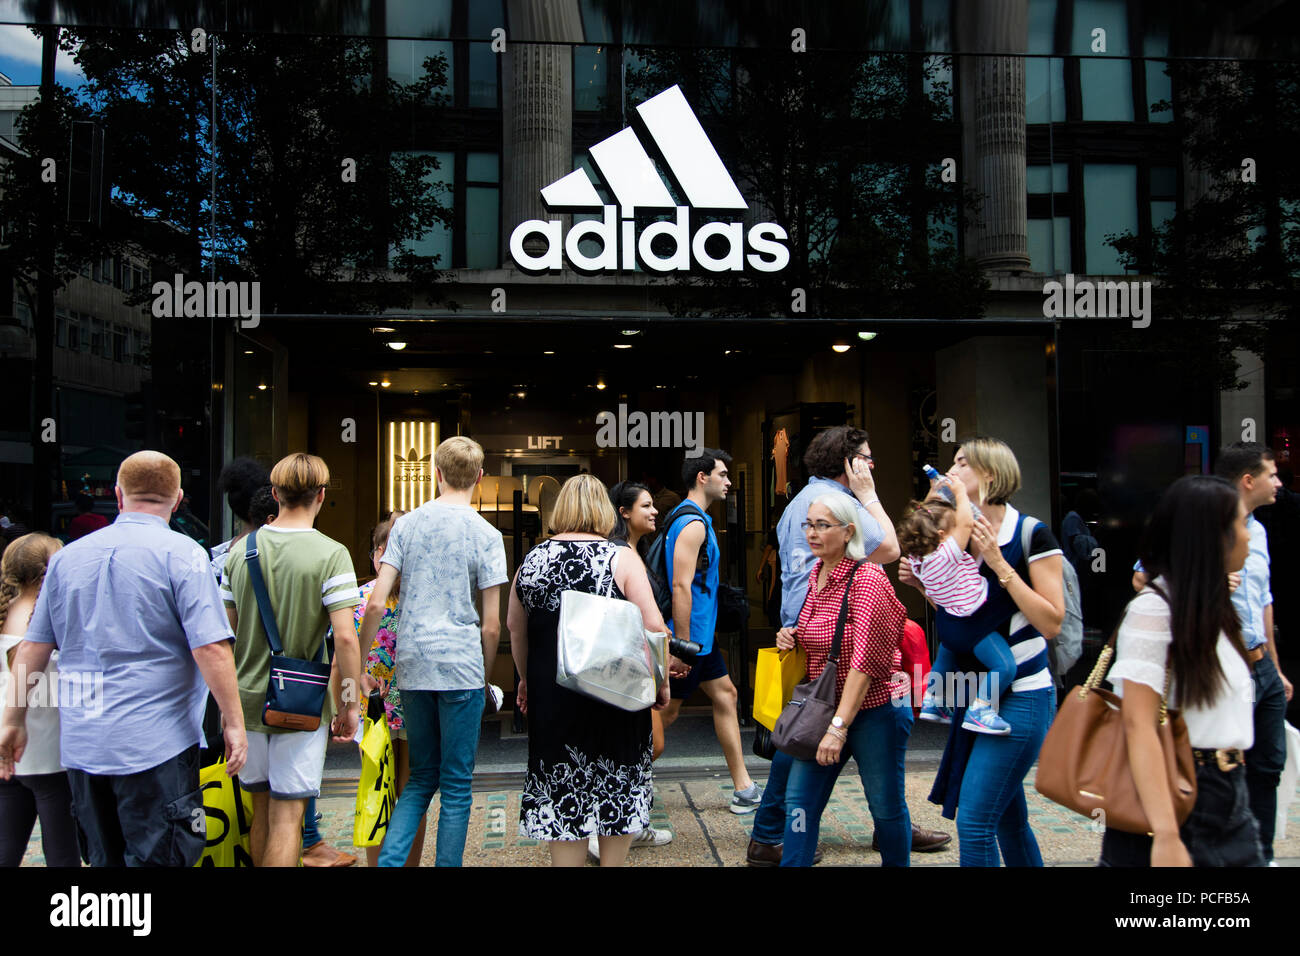 magasin adidas londres